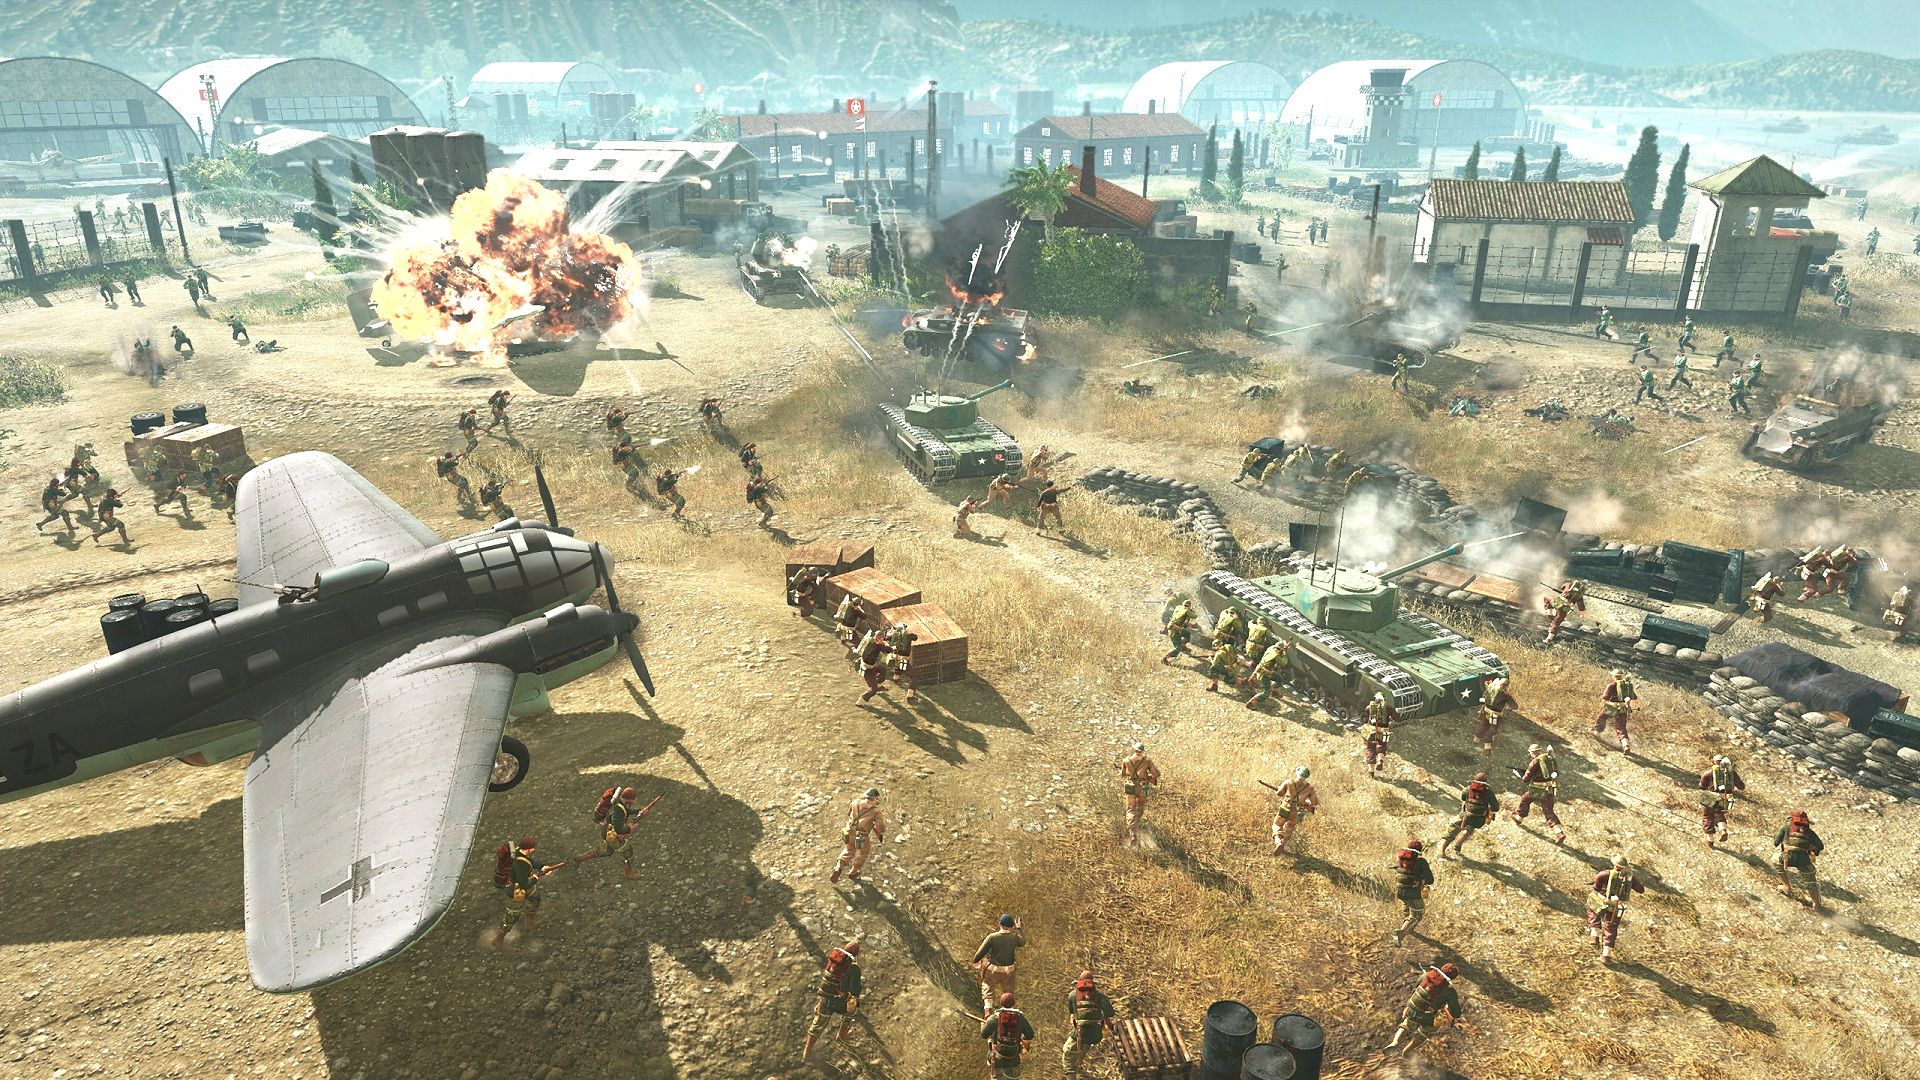 Company of Heroes 3 is “over a year” from release, but you can play it right now